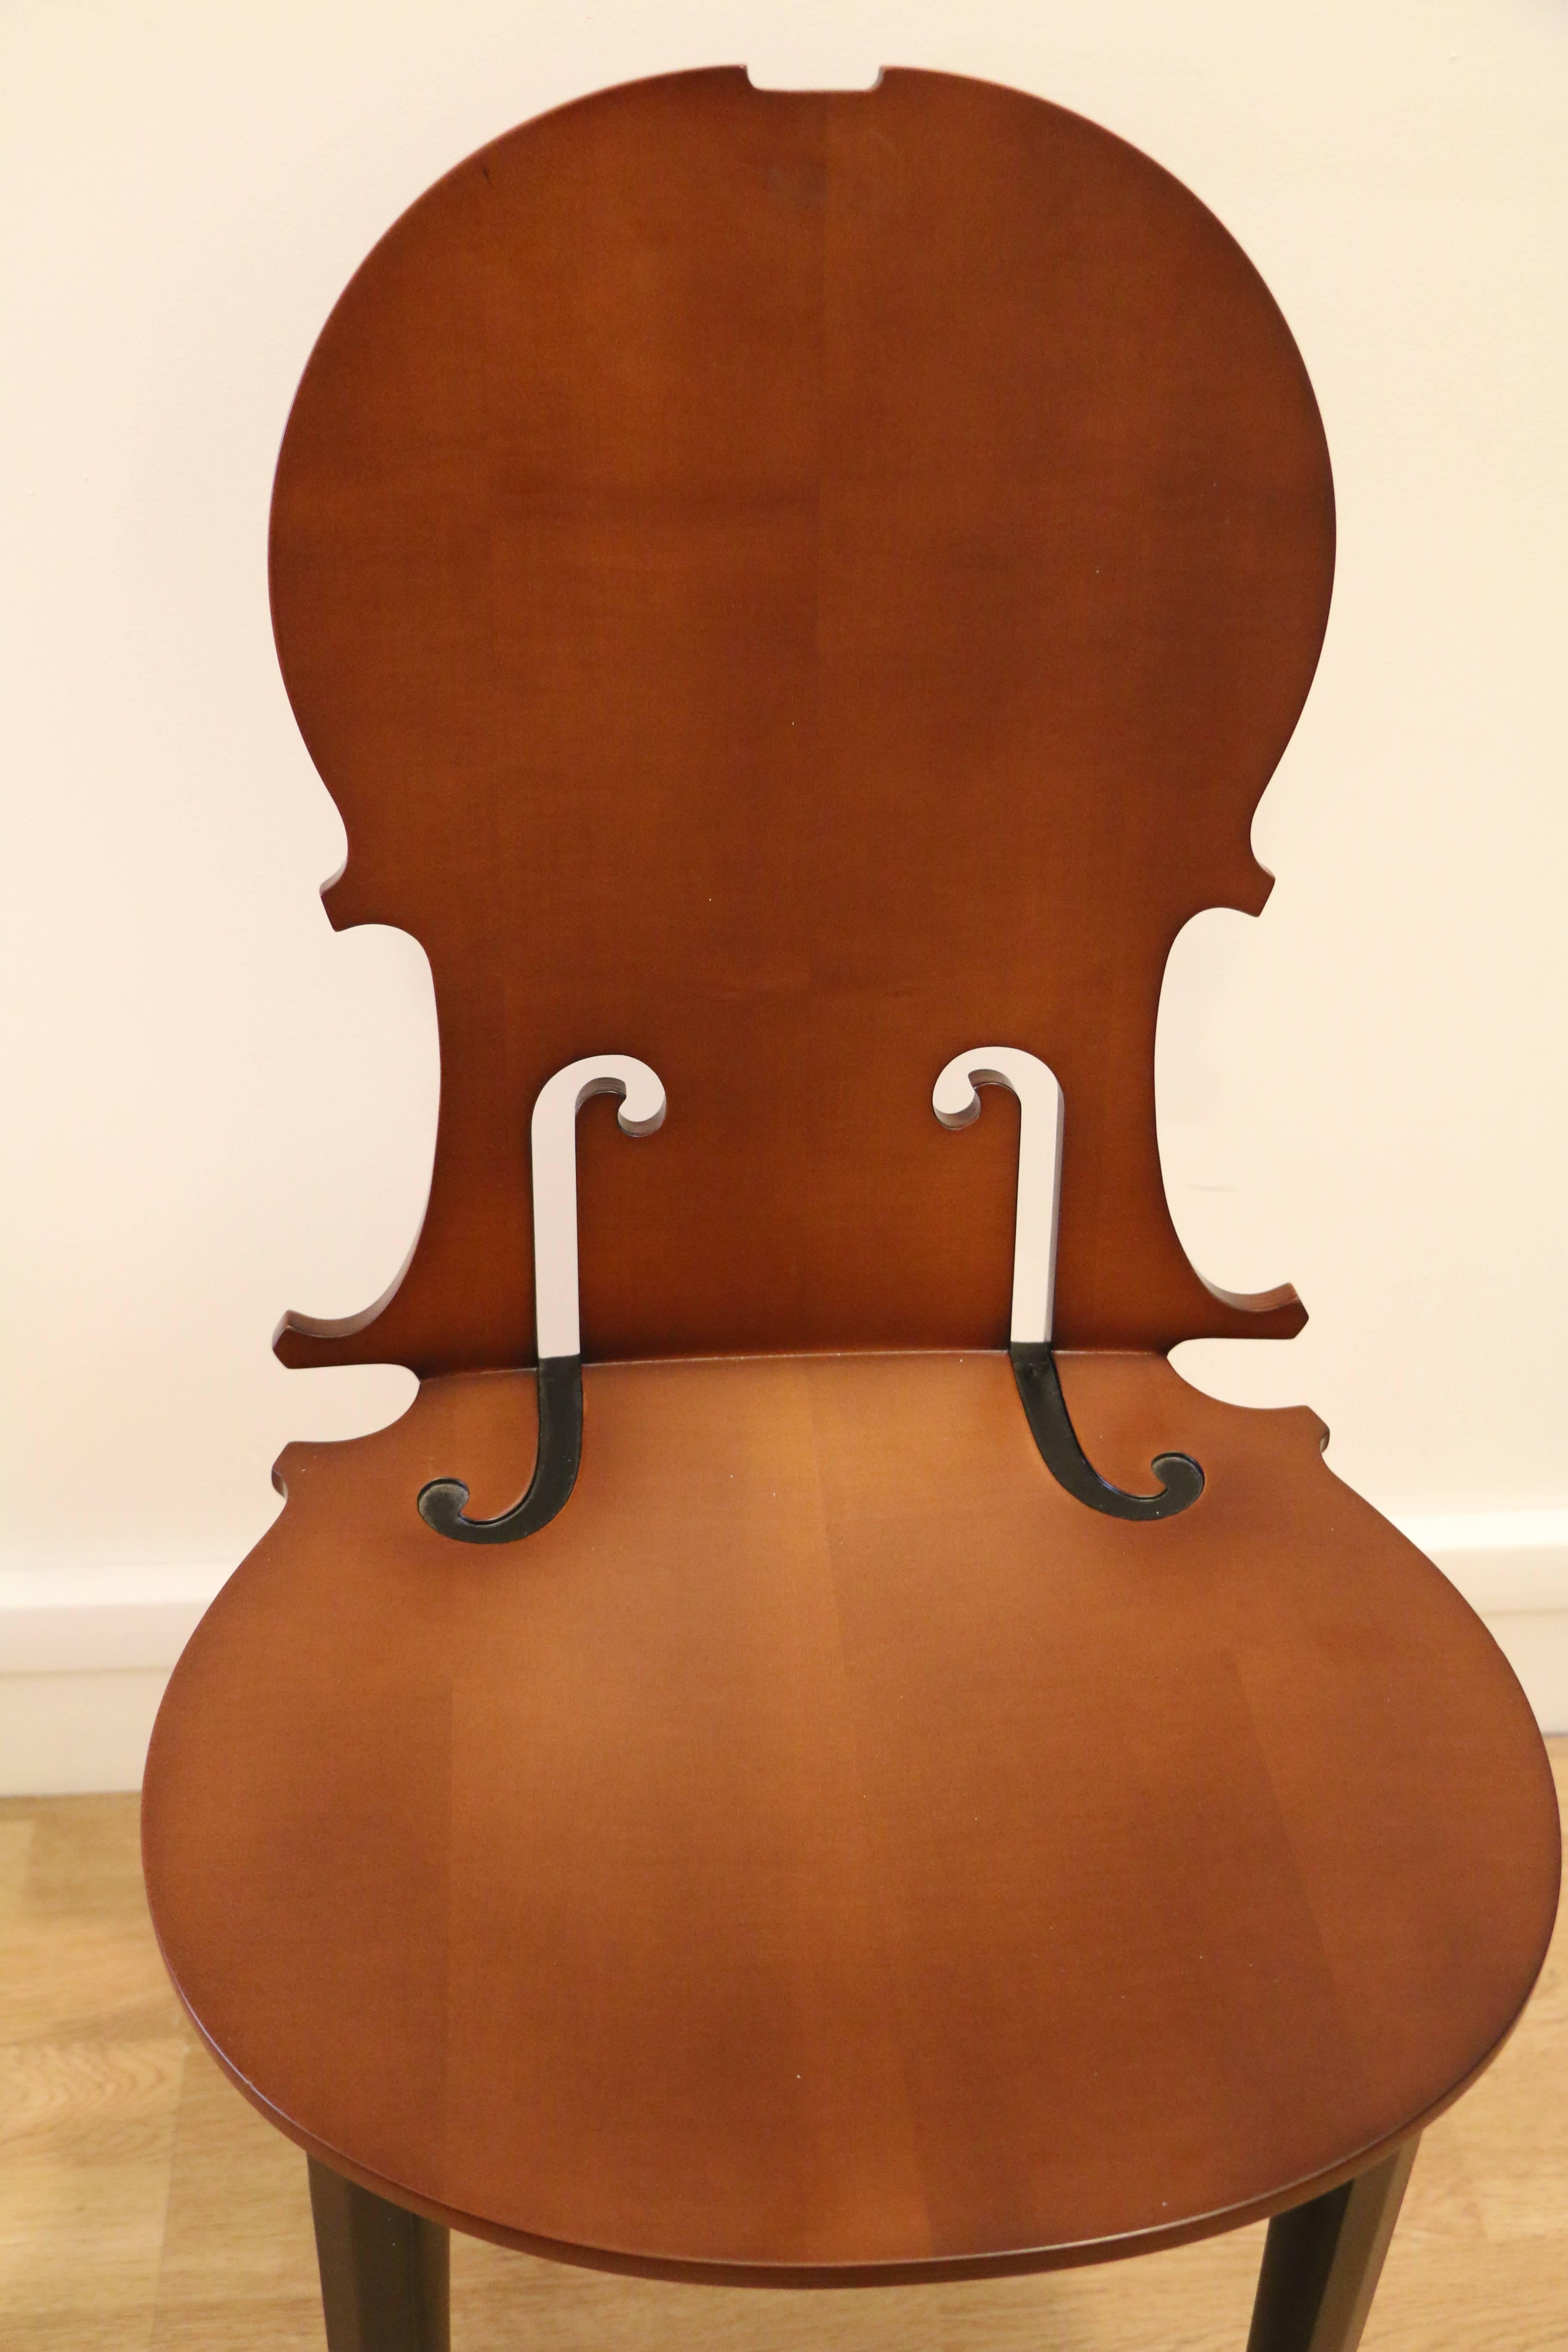 Cello chair by Arman editions Hugues Chevalier n°4/50. Wood (sycamore and beech), France.
Signed under the seat on a brass plate.
To our knowledge this is the only wood edition of the famous Cello chair by Arman.
Dimensions:
H : 85,5 cm ; H